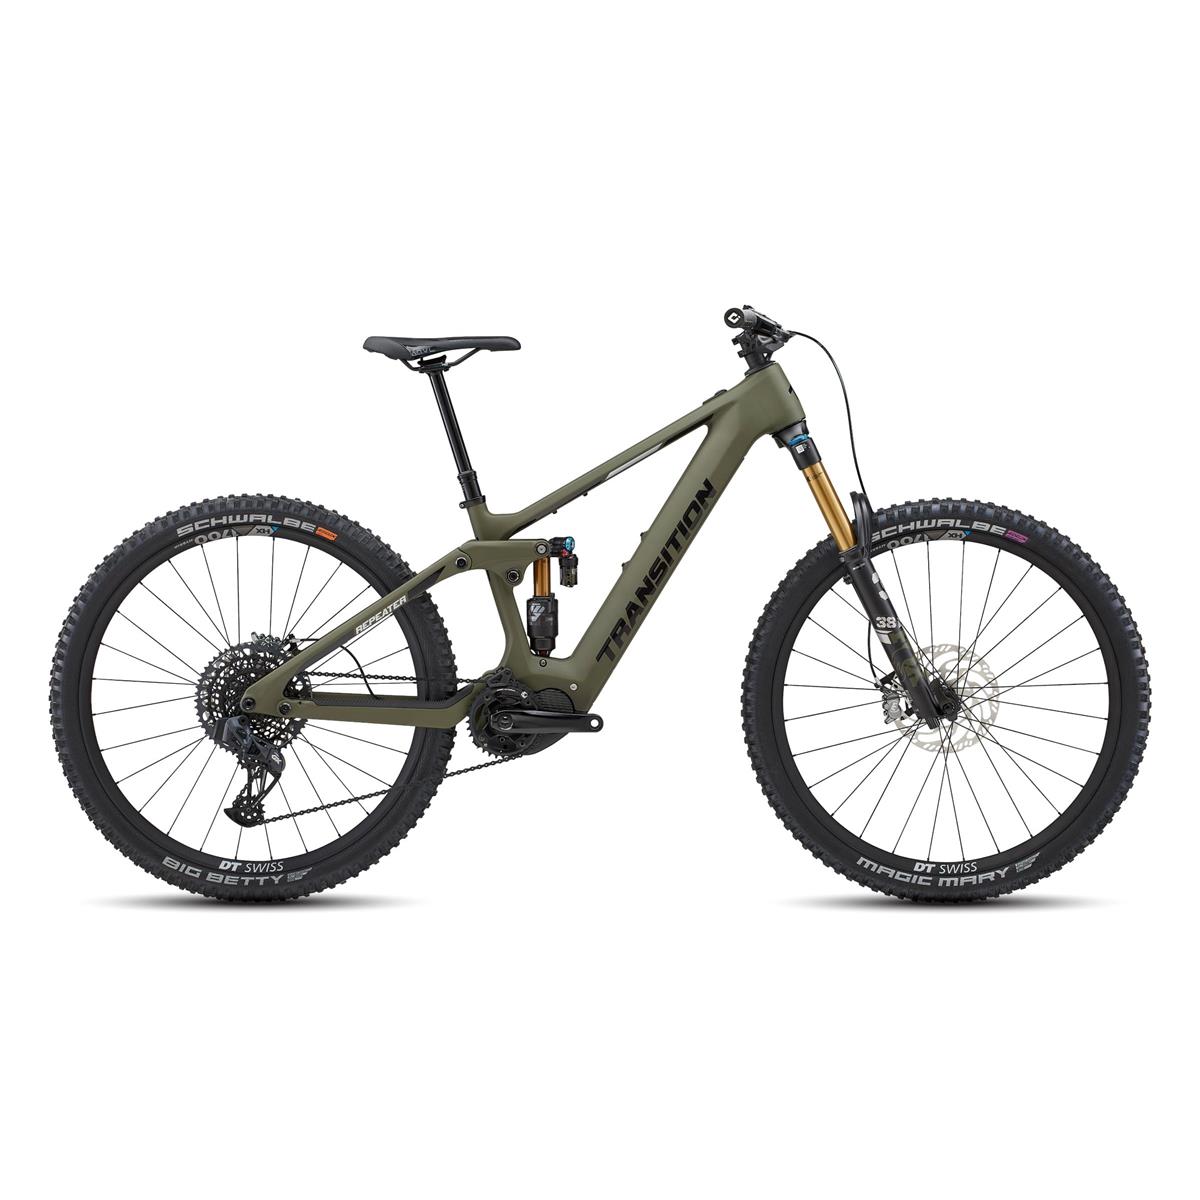 Repeater Carbon AXS 29'' 160mm 12v 630Wh Shimano EP8 Mossy Green Taglia XL